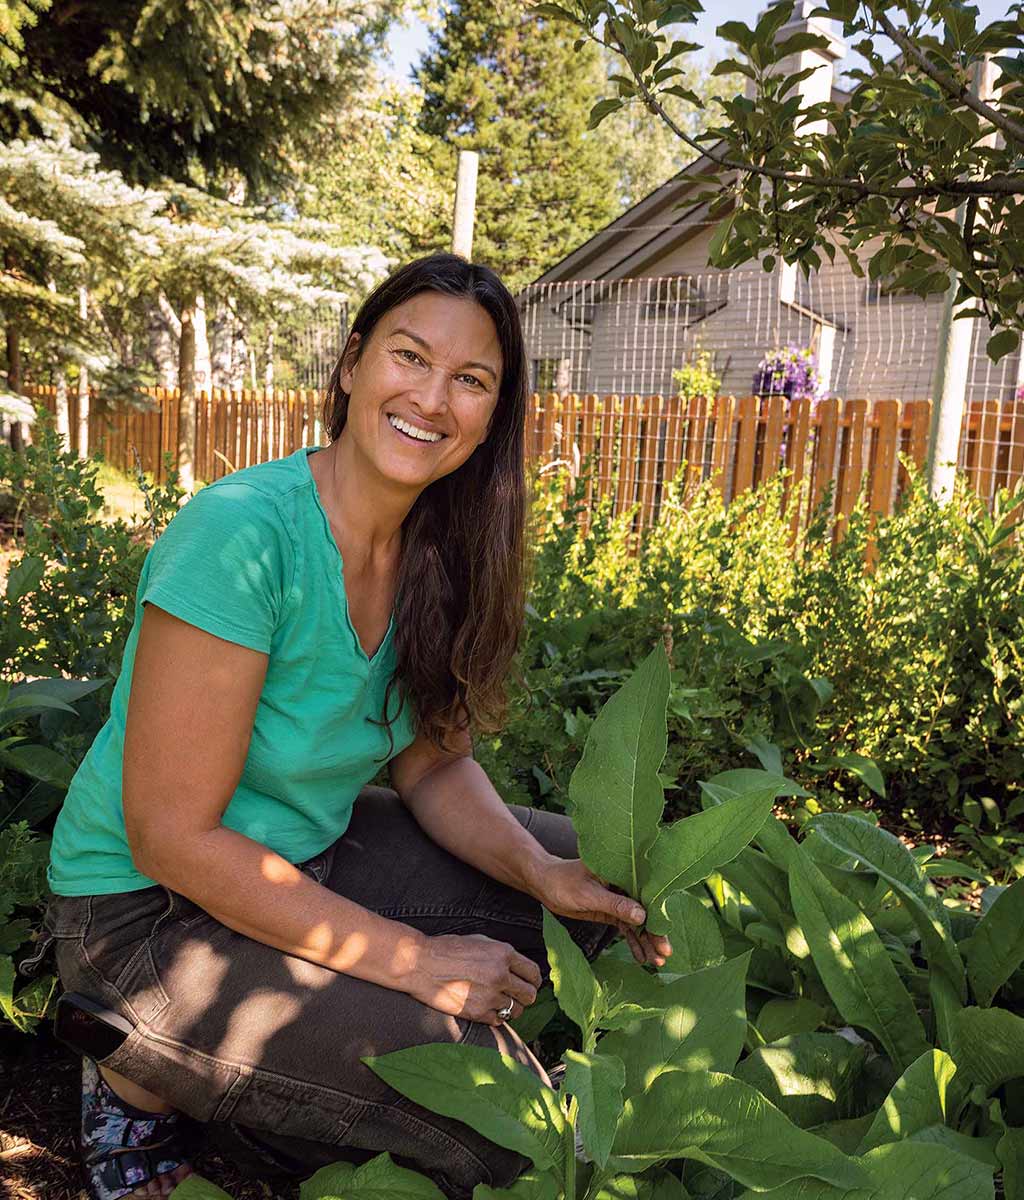 woman with long dark hair squatting and smiling holding large plant leaves